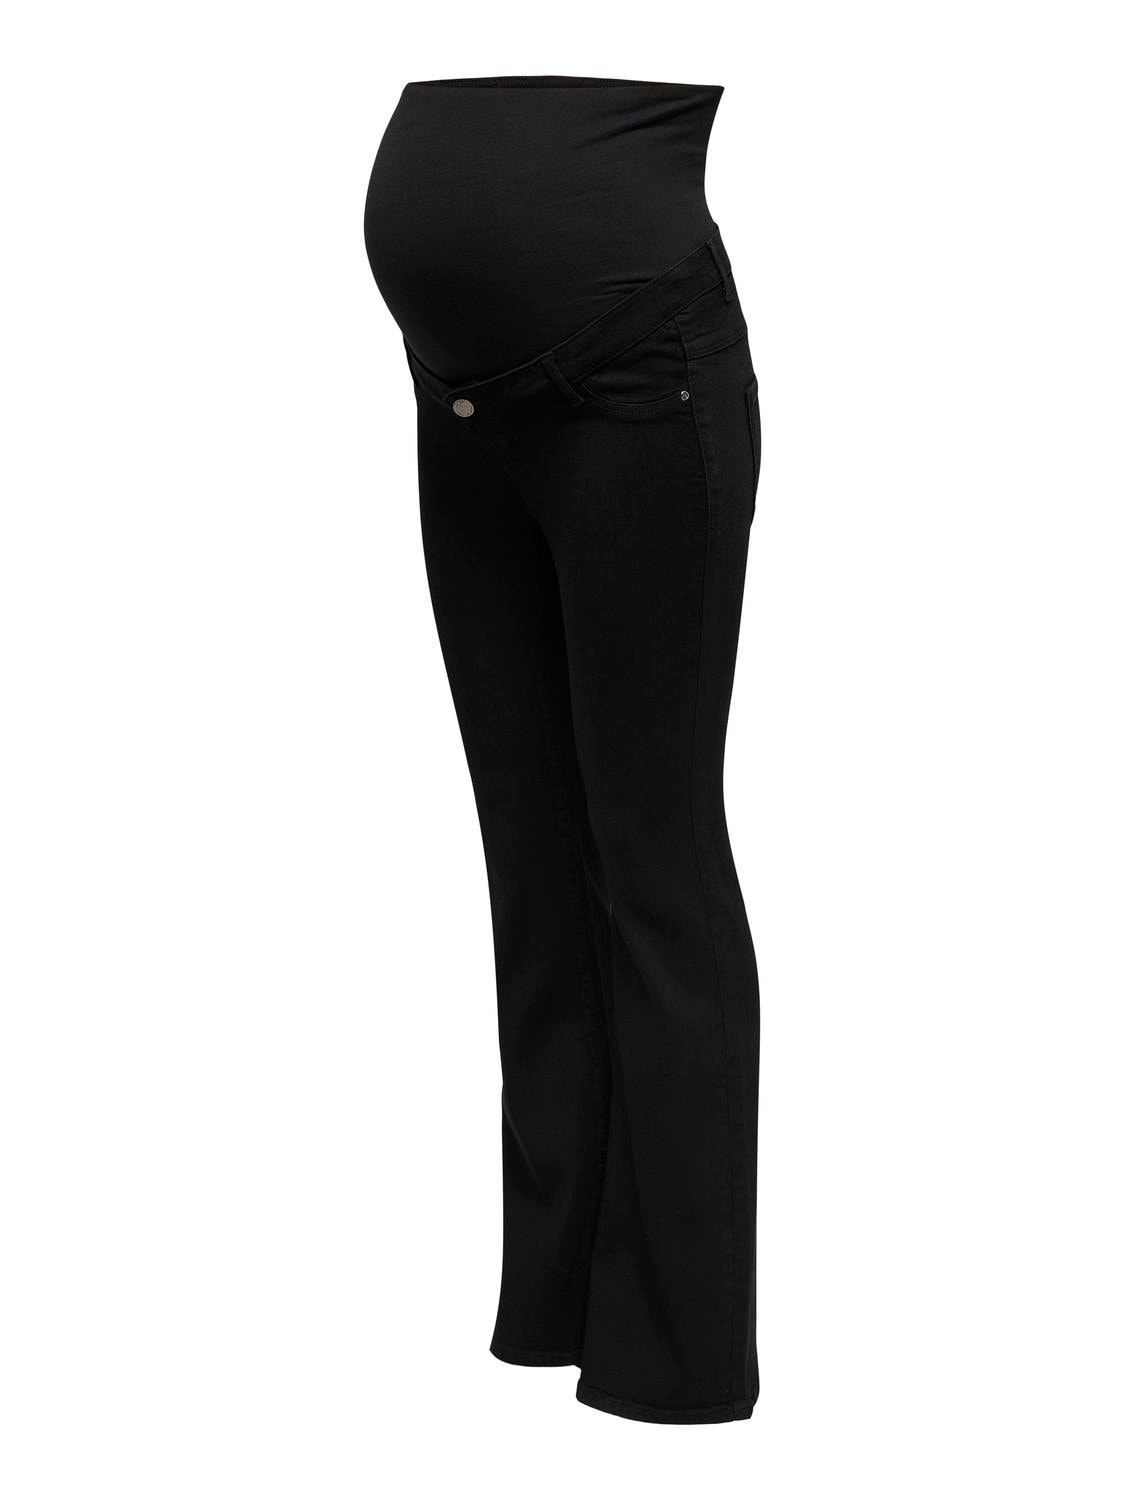 ONLY Flared Fit High waist Jeans -Black - 15248072